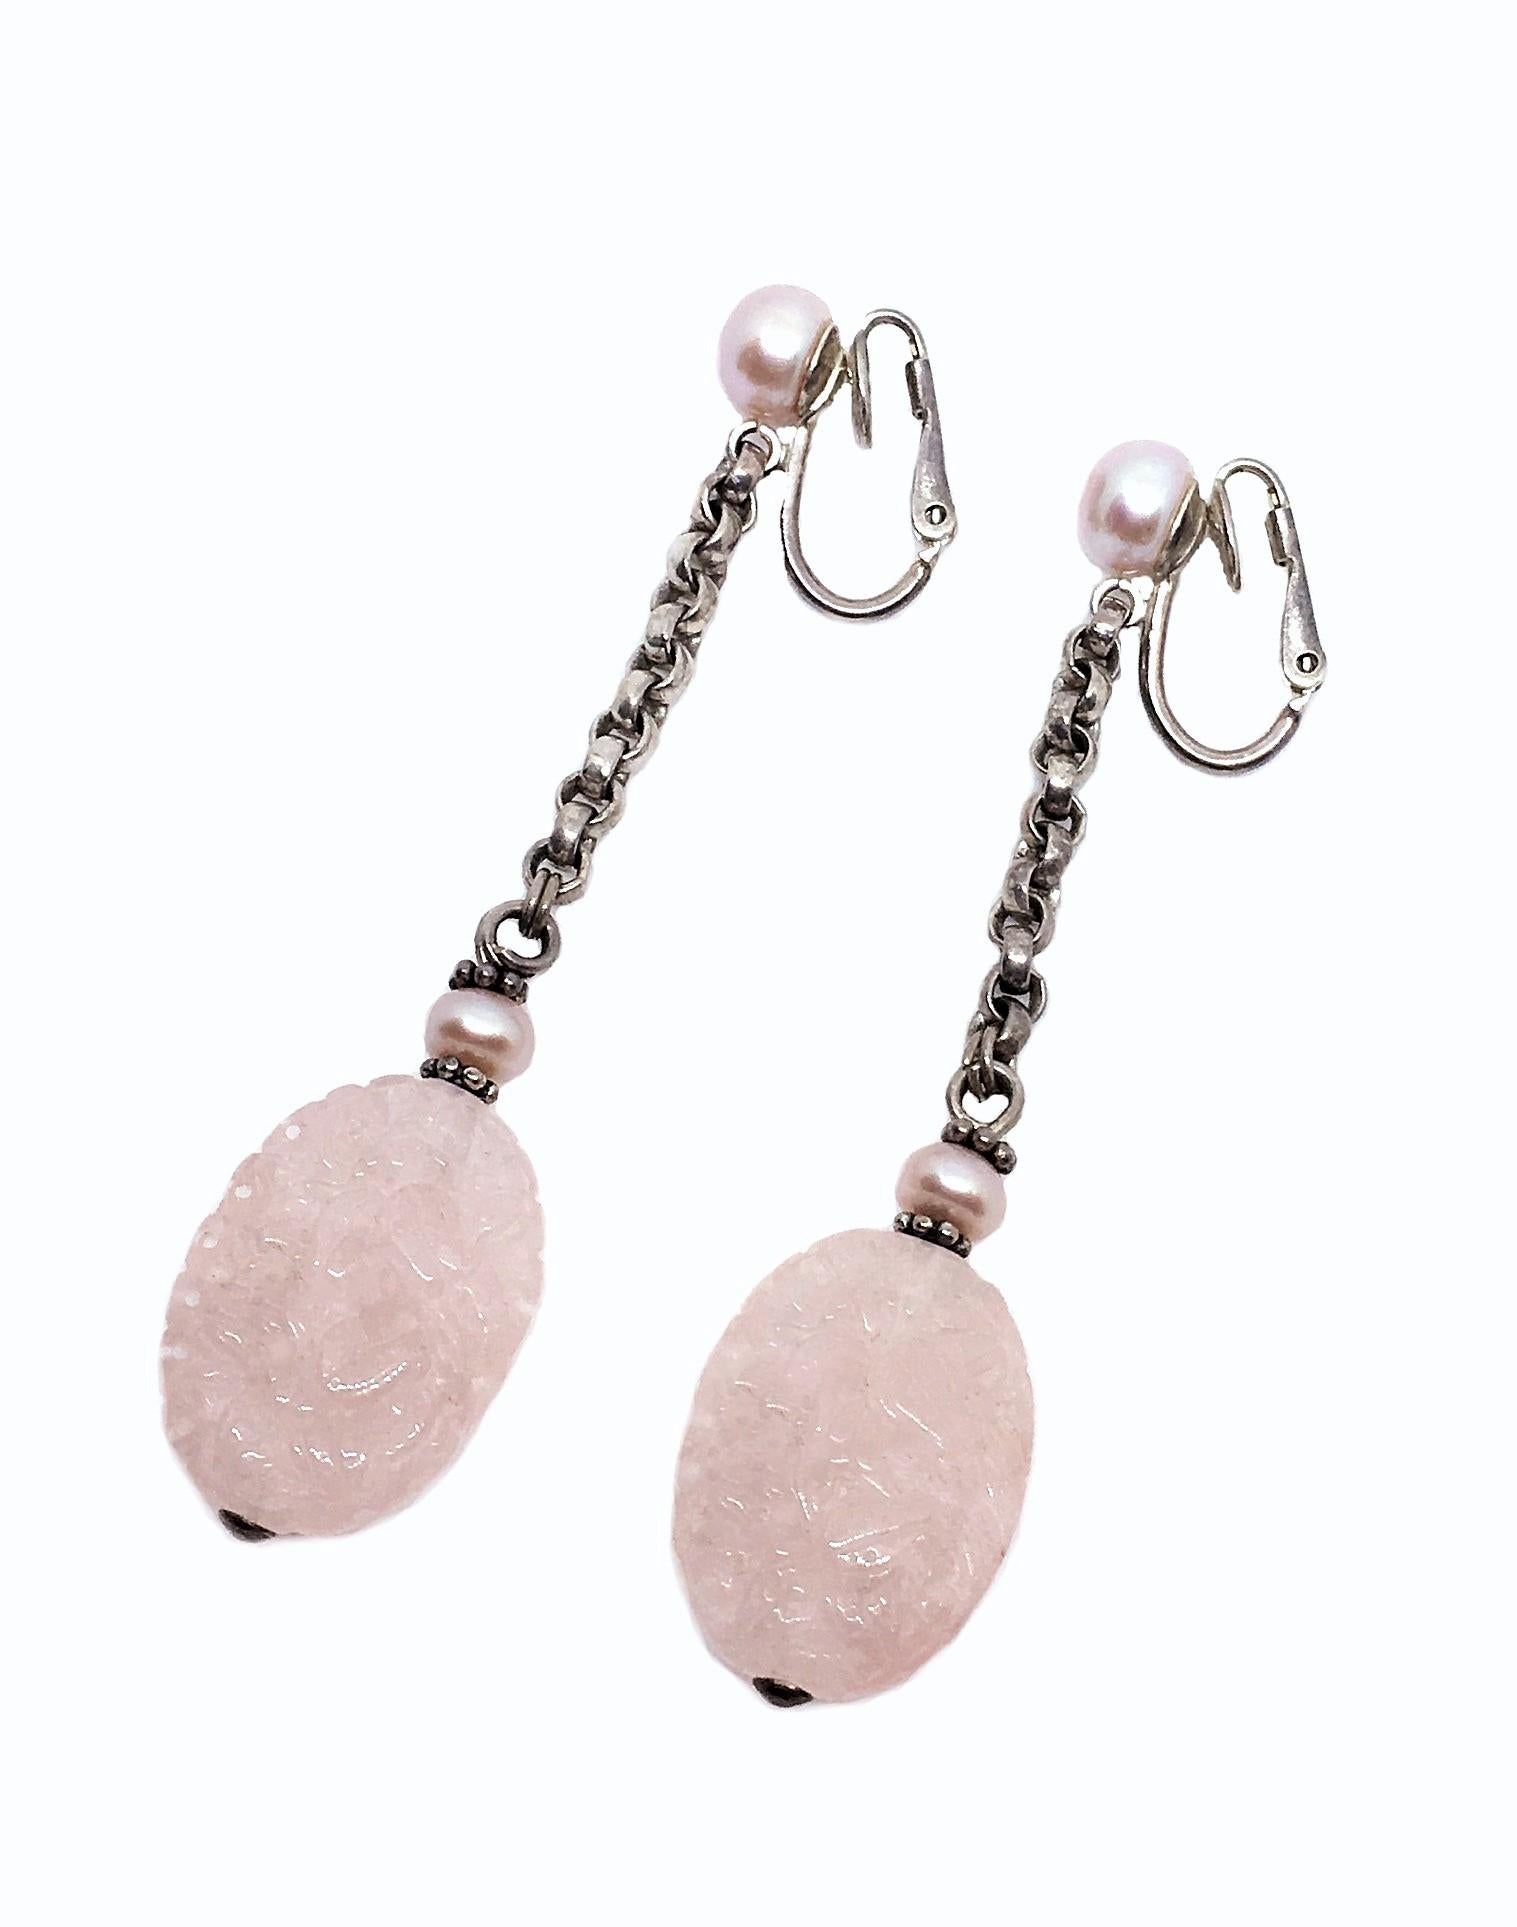 Sterling silver clip-back earrings with pale pink carved oval rose quartz drops, hanging from sterling silver link chains and embellished with pale pink cultured pearls.  Circa 1980s.  Each earring measures 2.75